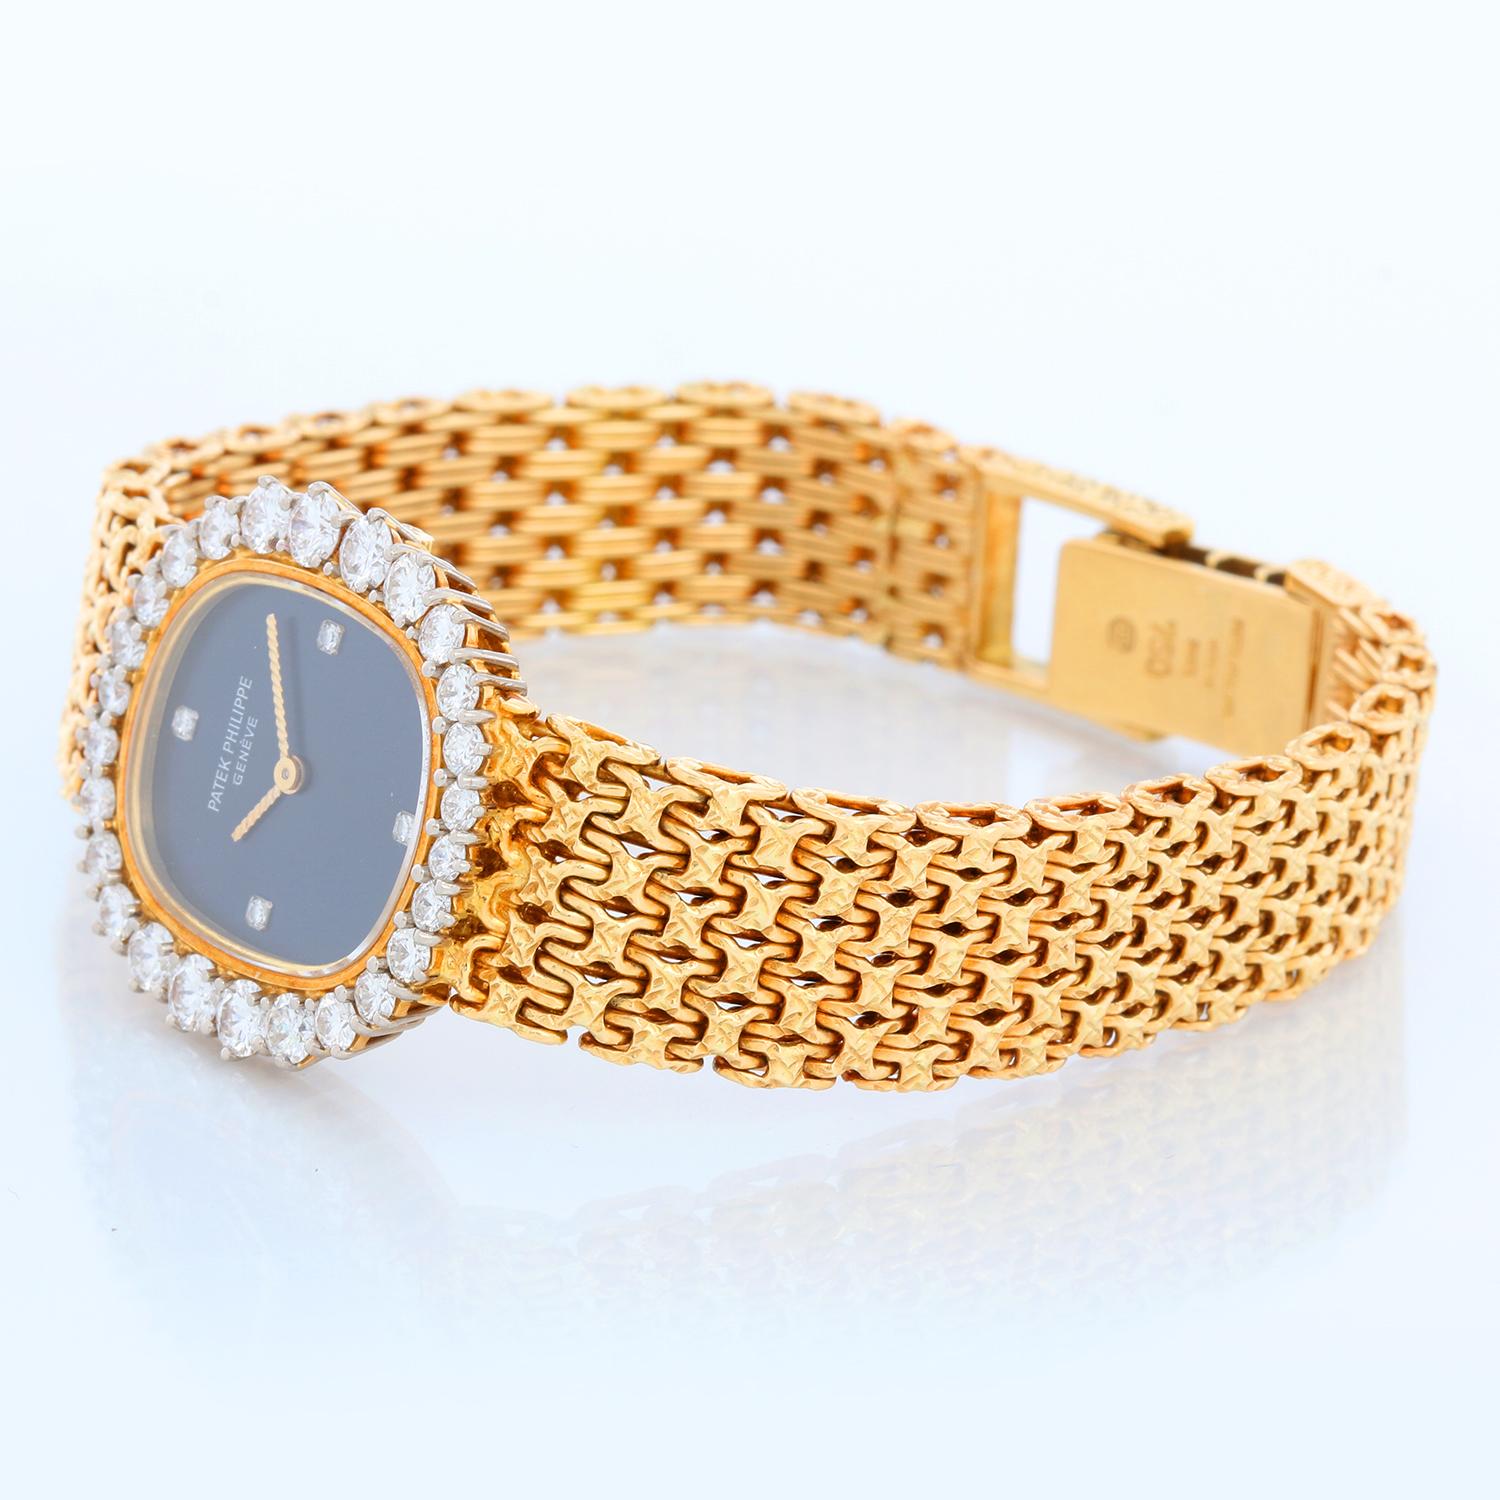 Patek Philippe Ellipse 4137 Diamond Bezel Ladies Gold Watch - Manual winding . 18k yellow gold case (25mm) with factory diamond bezel. Blue dial with factory diamond hour markers.. 18k yellow gold Patek bracelet with locking clasp; will fit up to a